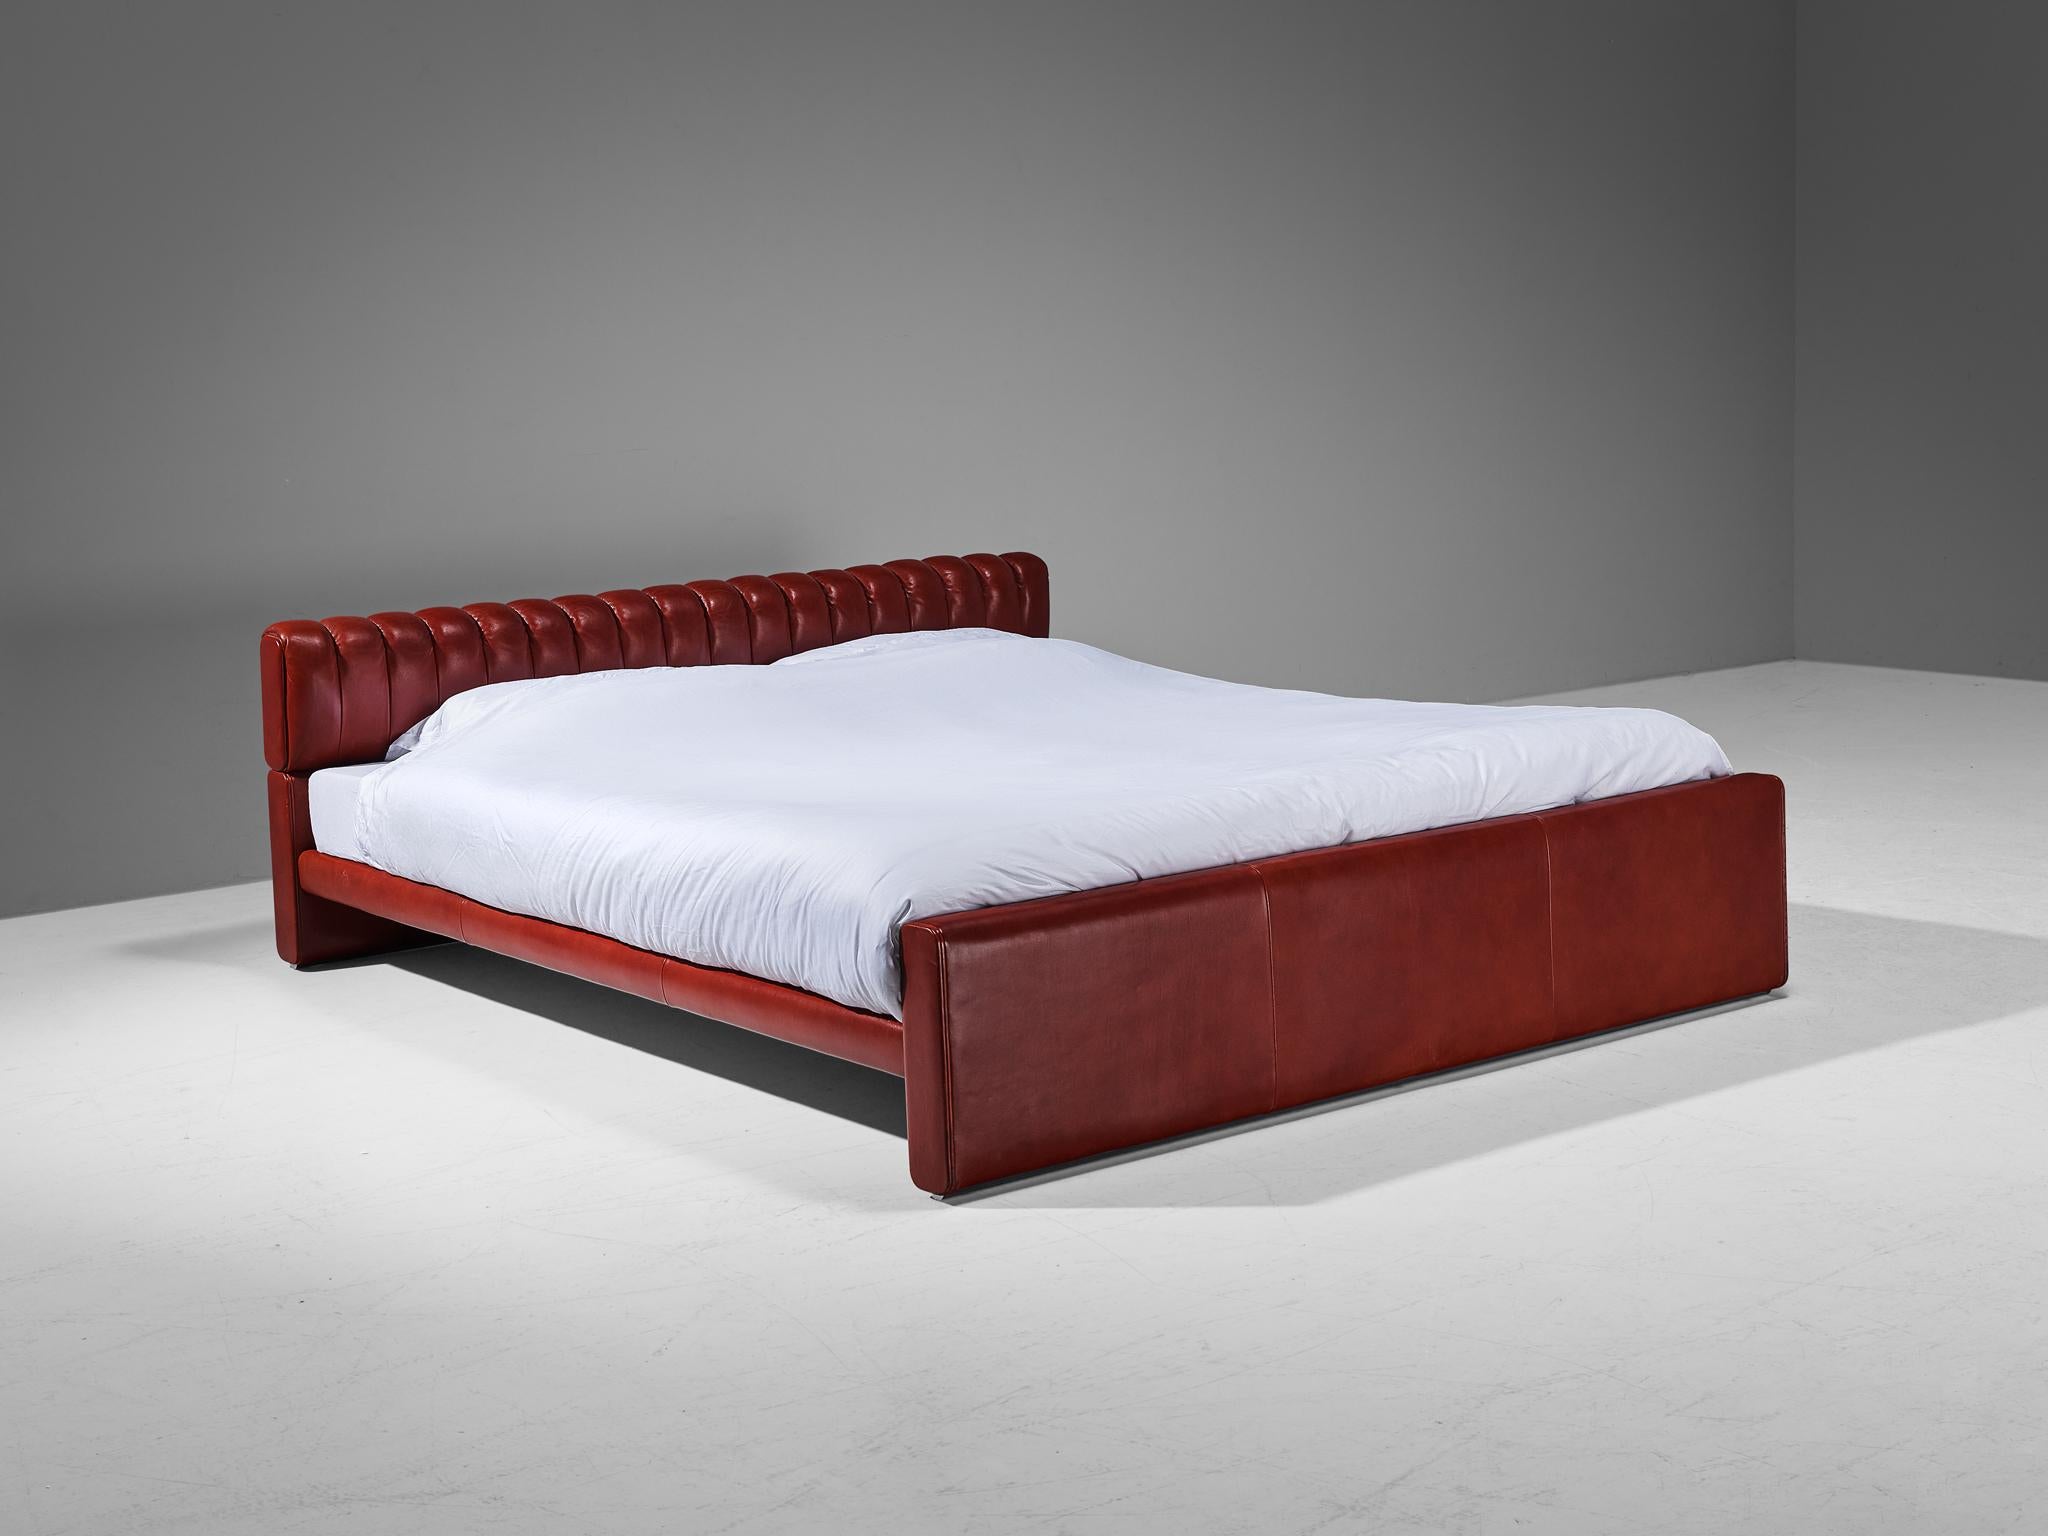 Luigi Massoni for Poltrona Frau, double bed model 'Losange', wood, leather, Italy, design 1972

A classic double bed designed by Luigi Massoni in 1972. This bed is upholstered in a beautifully bright red leather that immediately catches the eye. The